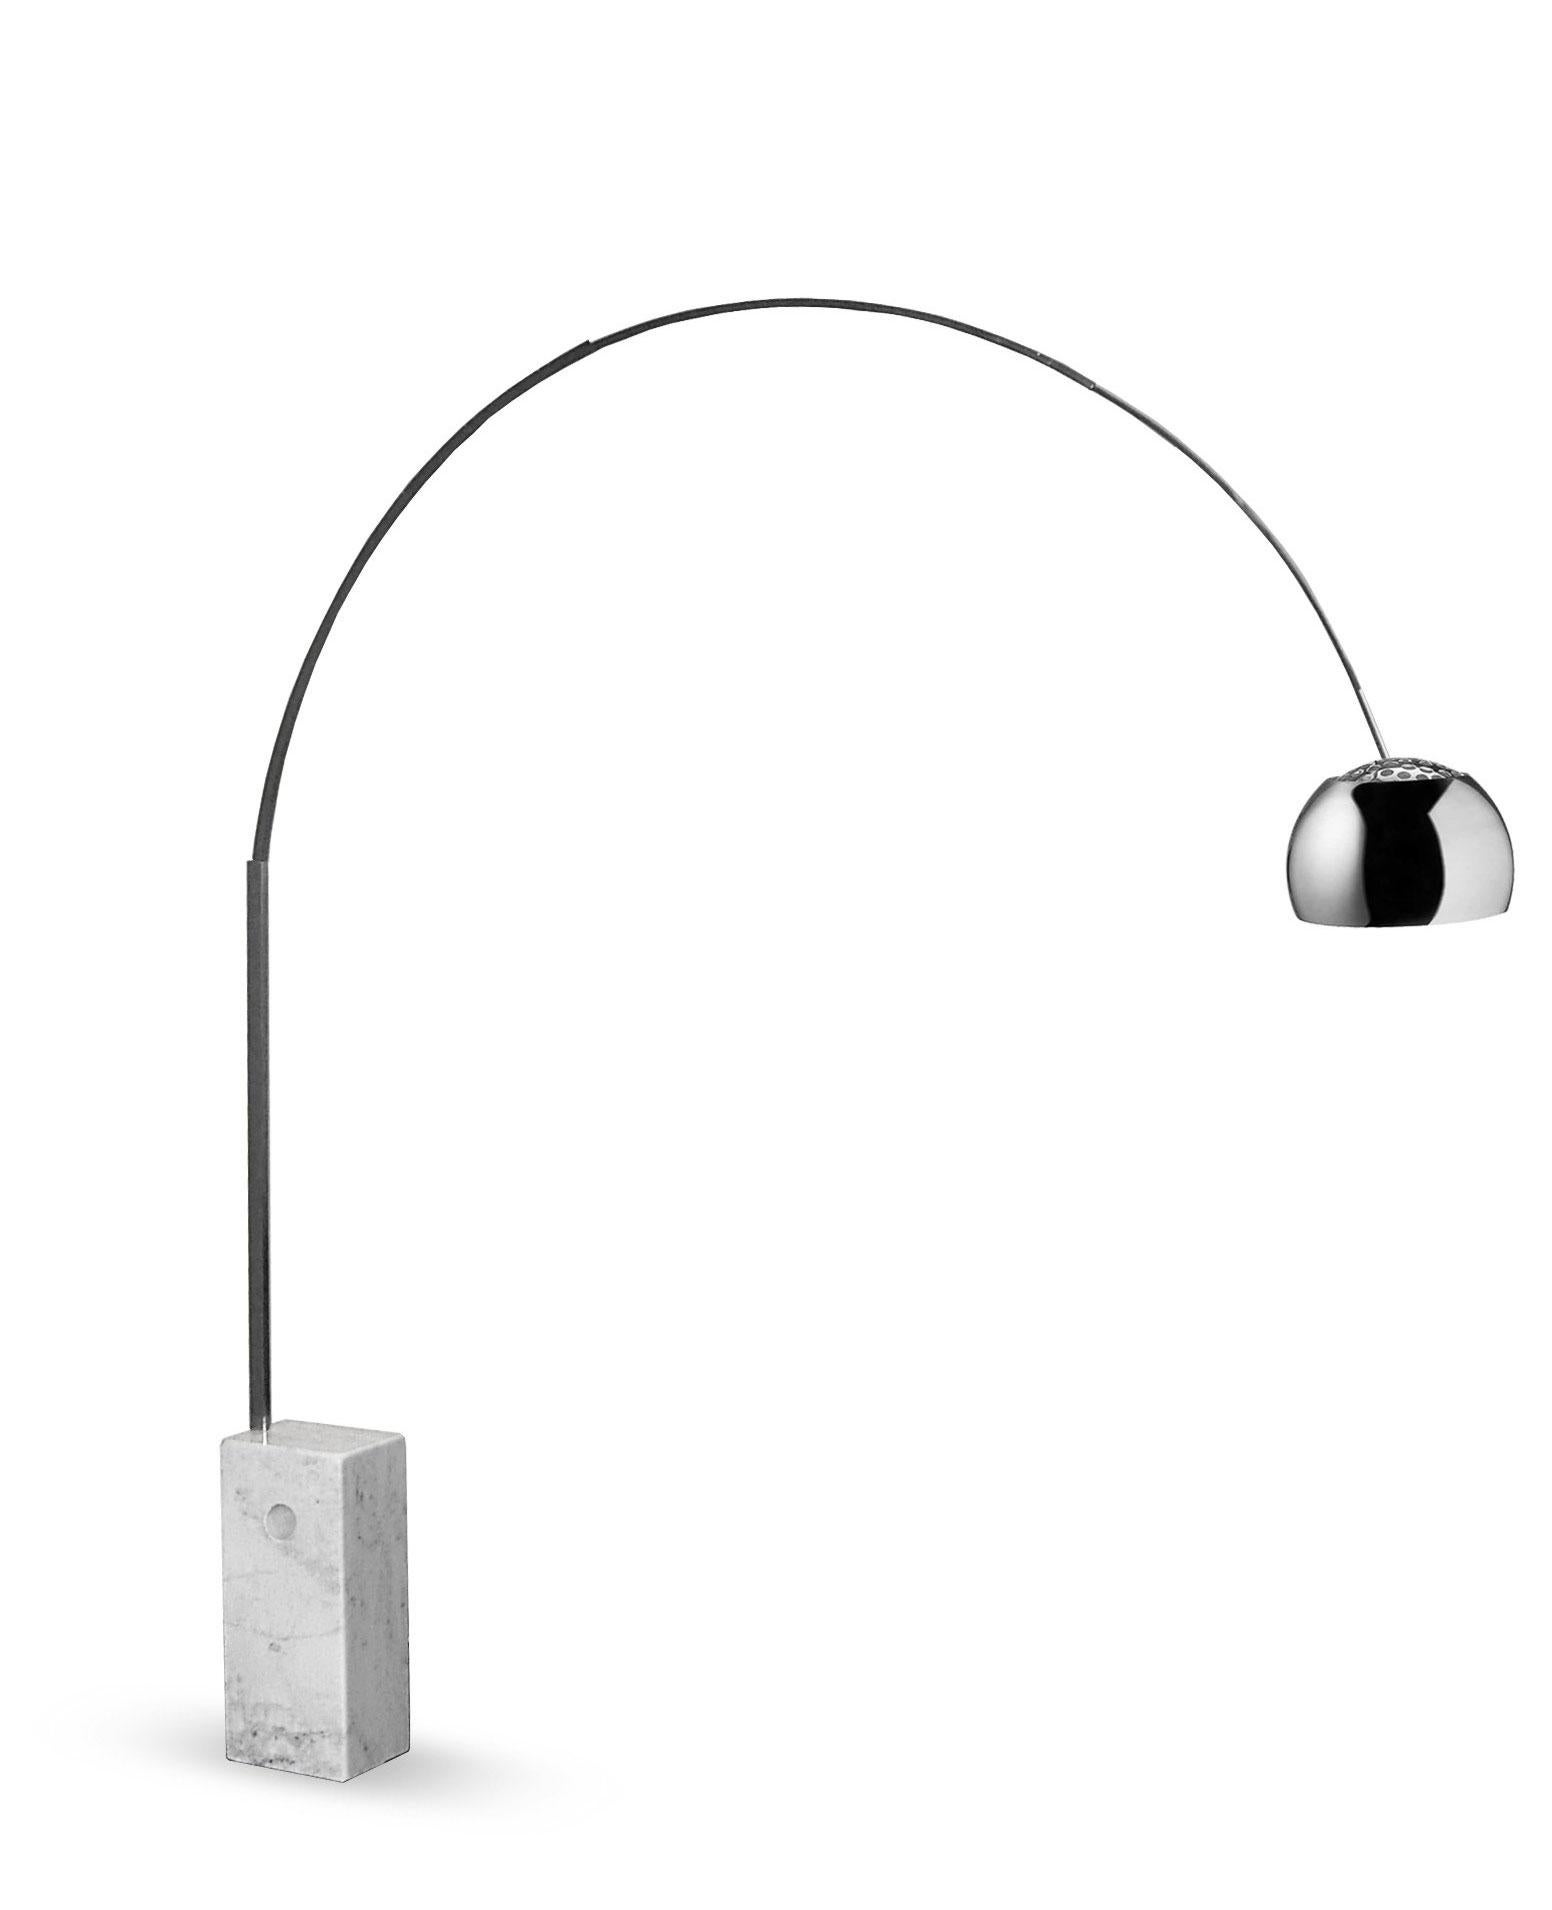 The brothers Castiglioni designed their iconic Arco lamp in 1962 to cast light far from a power source. Its marble base is so heavy it was made with a hole where a broom handle could be inserted to help lift it. This example is an authentic FLOS